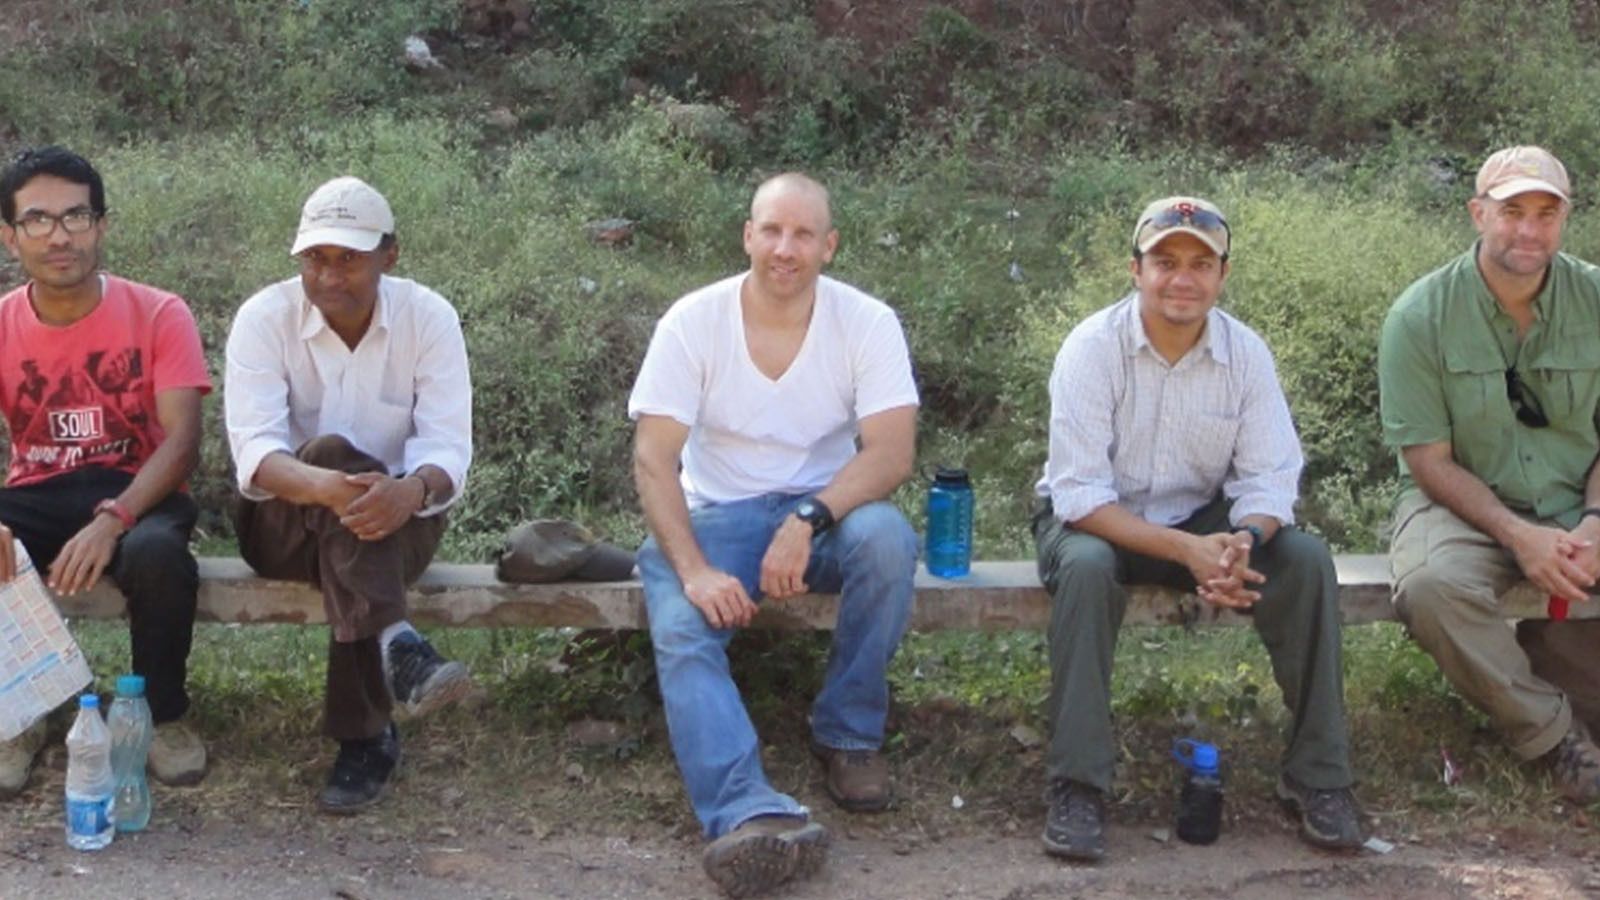 Professor Christopher Gilbert (center), at Ramnagar, is shown with members
of the team, including (from left) N. P. Singh, R. Patnaik, B. Patel, and C. Campisano.  

